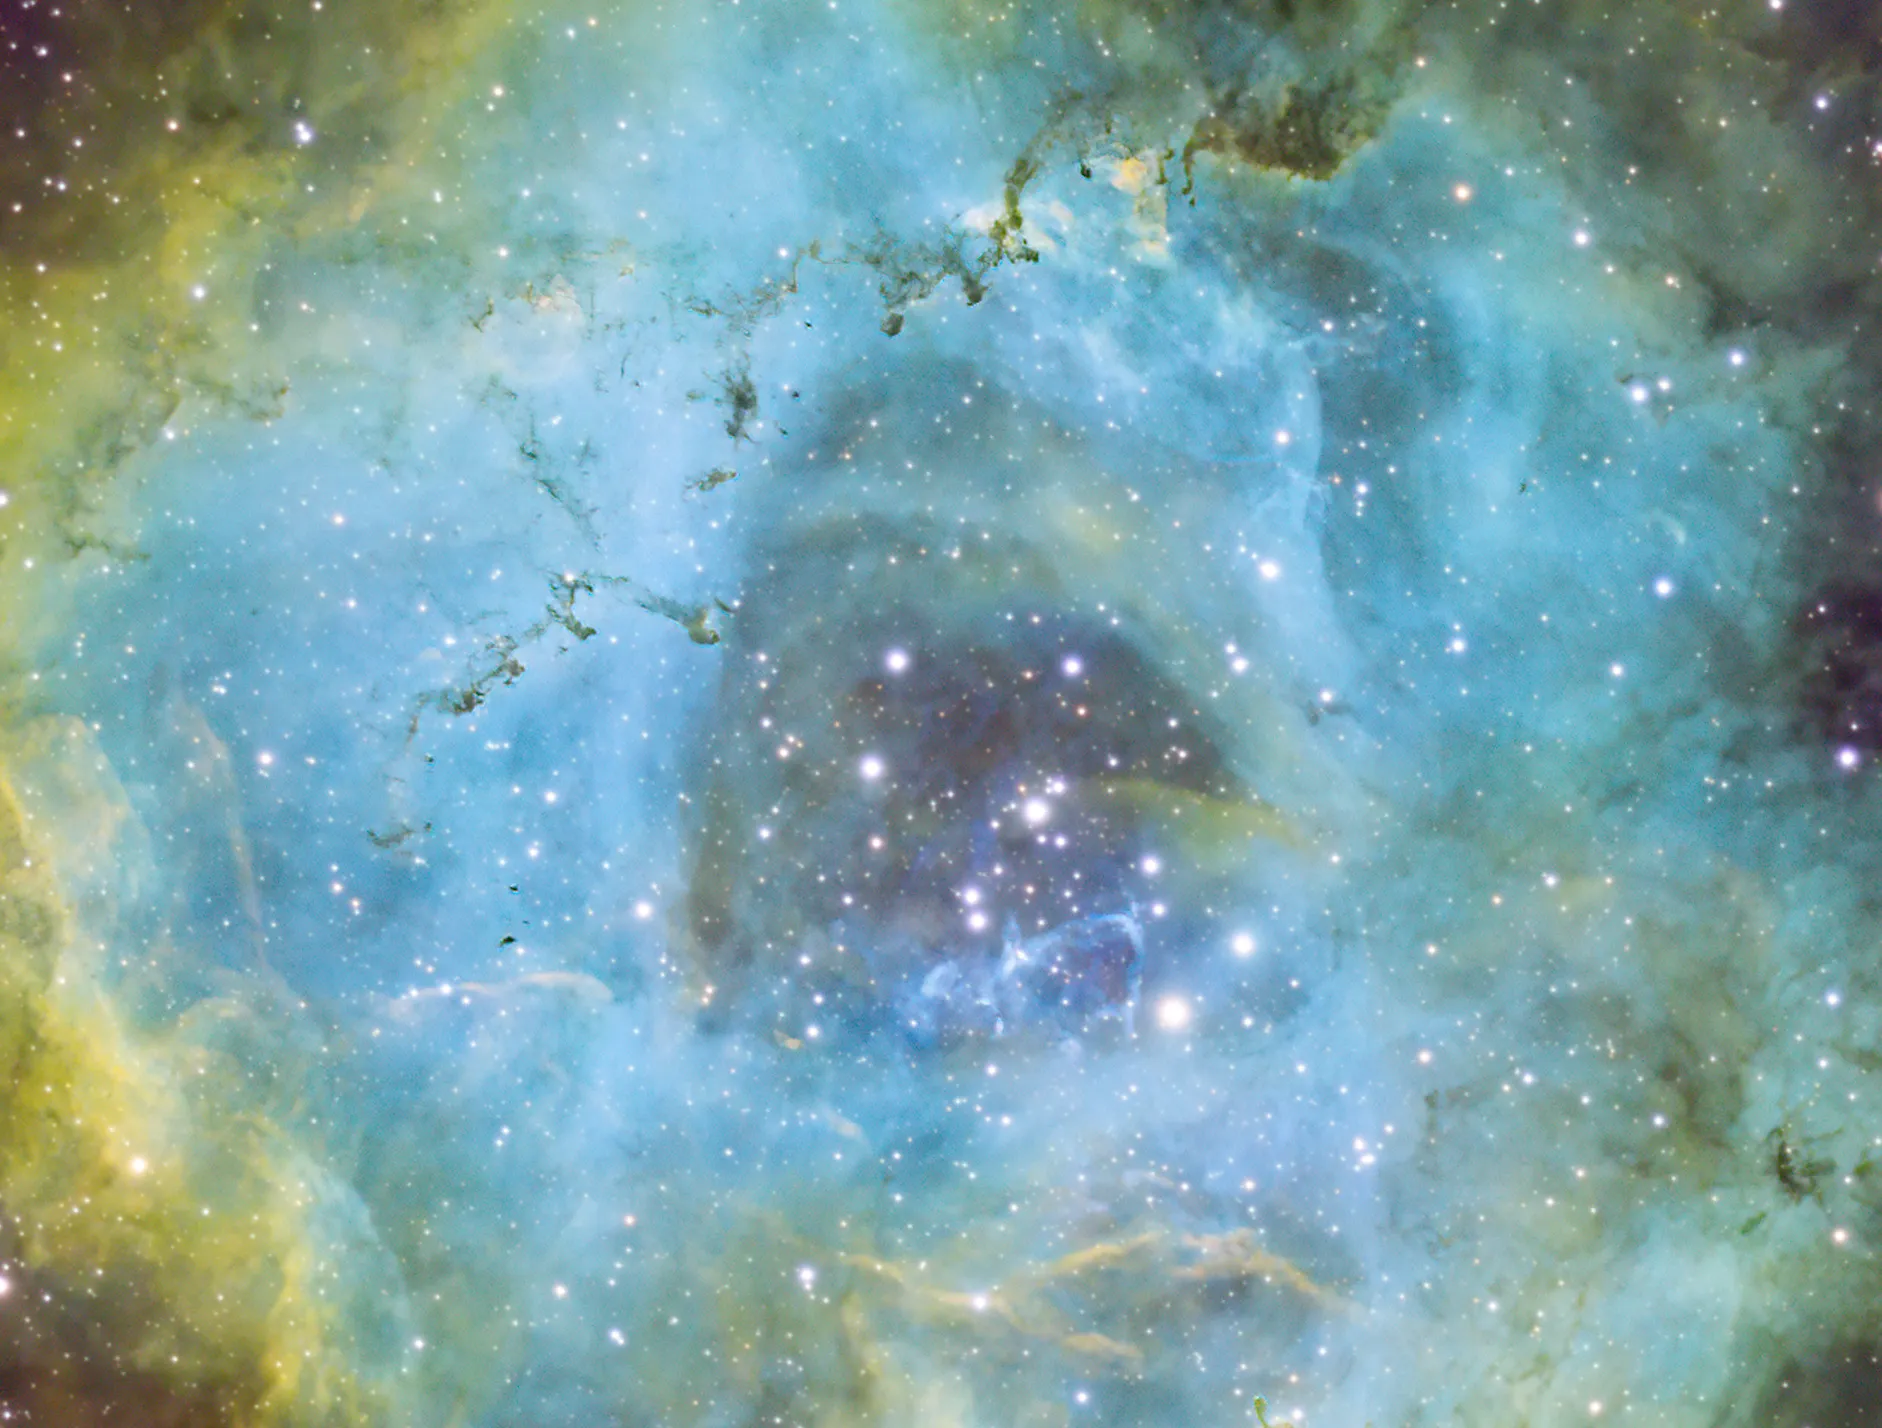 At the center of the Rosette Nebula is the open cluster NGC 2244.